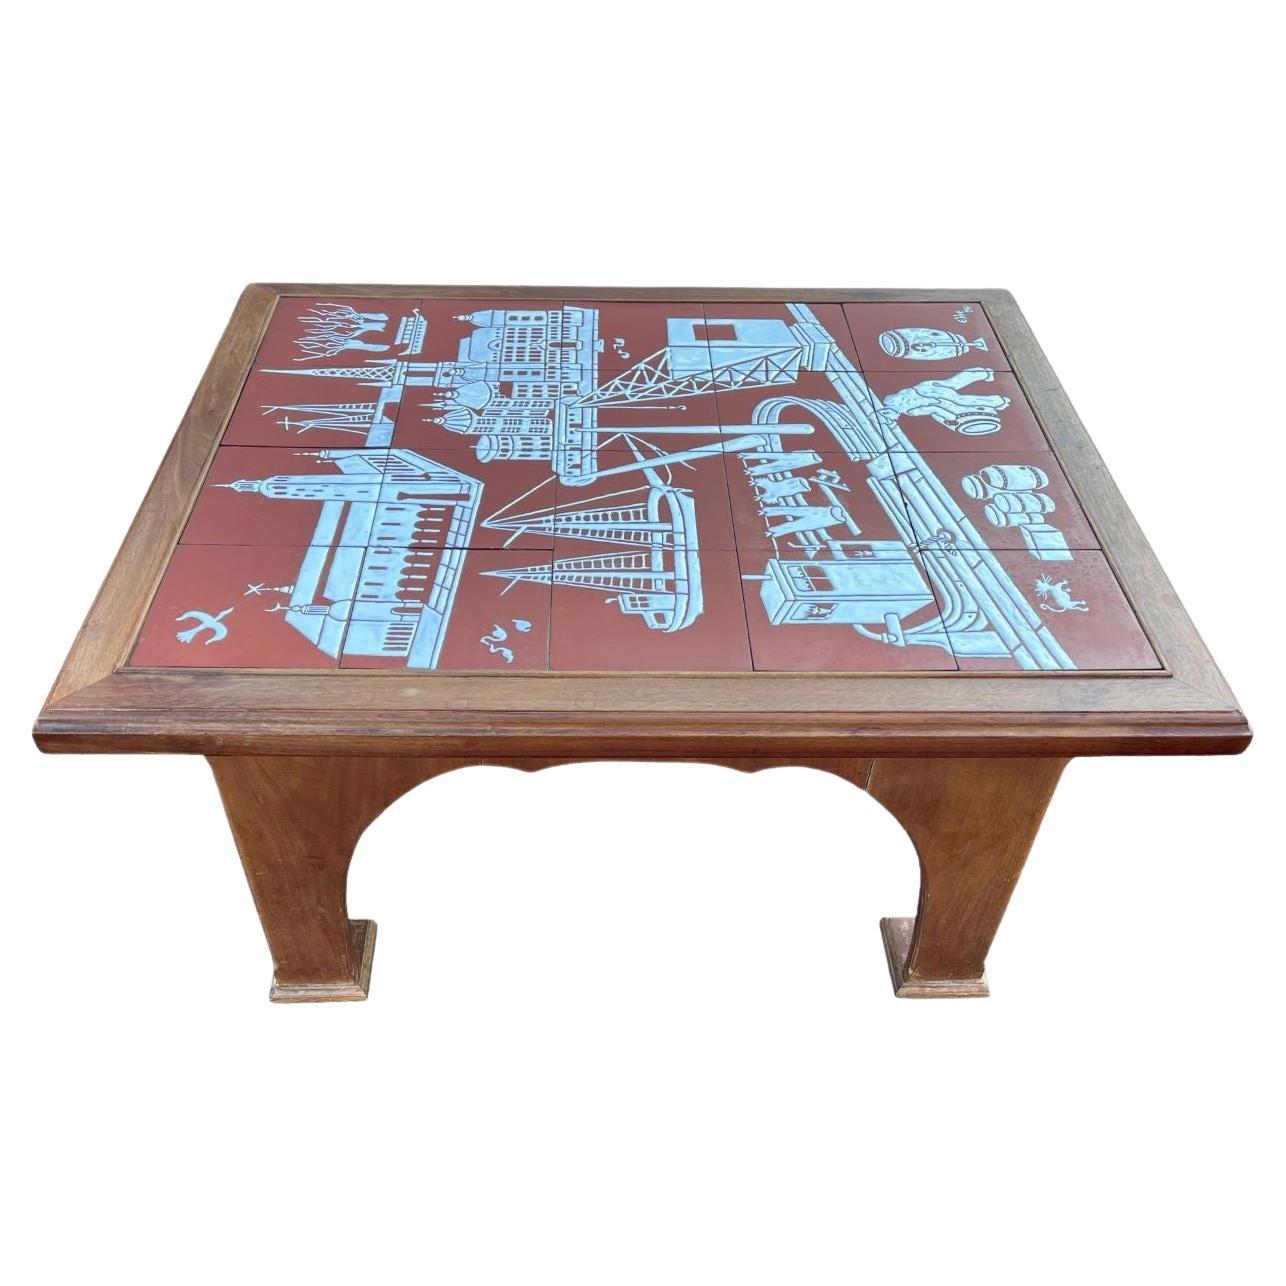 Beautiful Scandinavian Modern solid walnut tile top table by Ebbe, 1941. The tiles depict Scandinavian life as noted with a church and a castle, as well as sea and nature scenes. Table is in original condition and has not been restored. One small